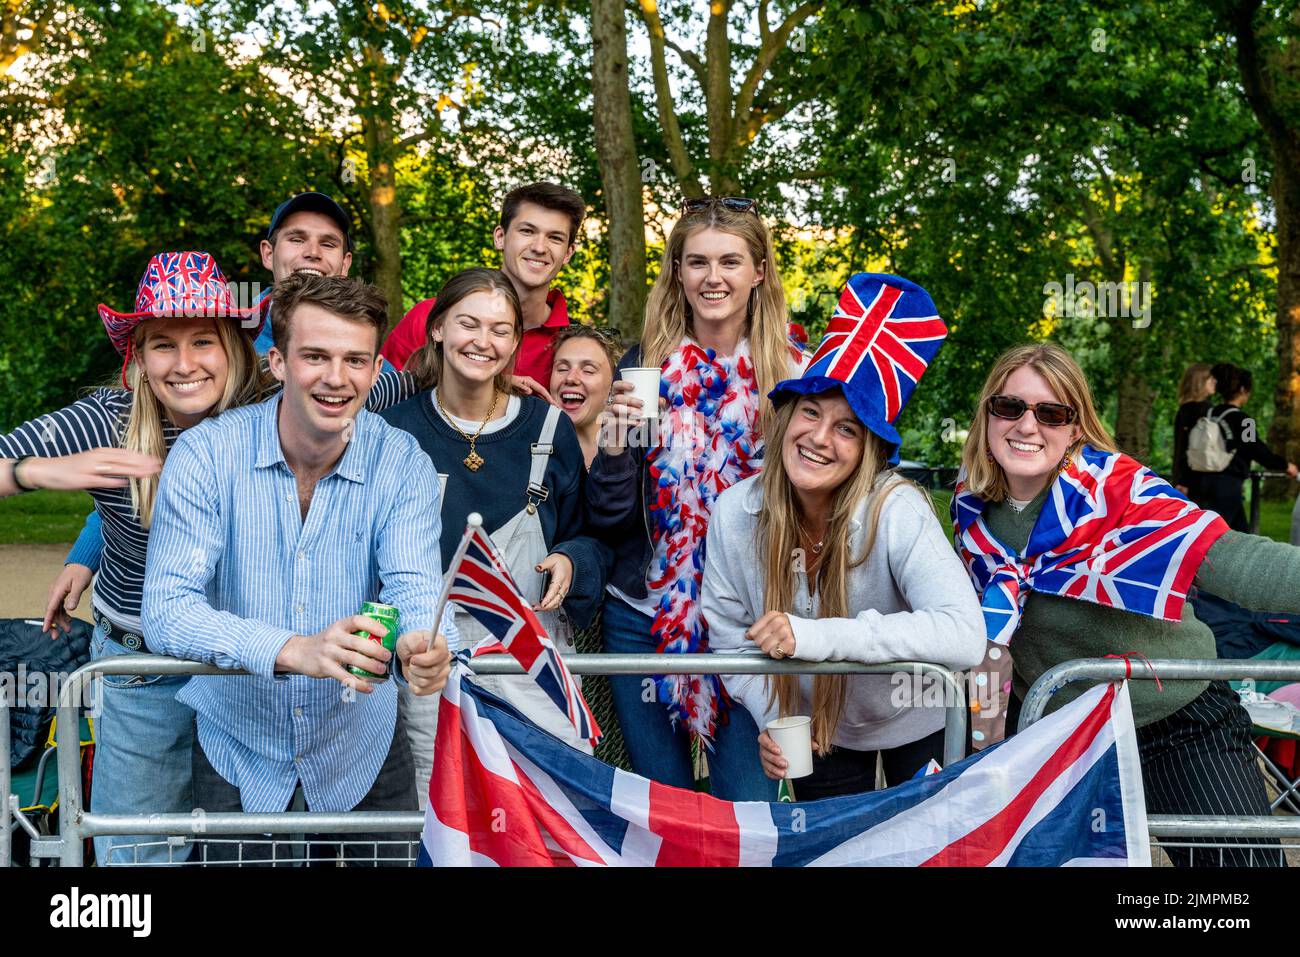 A Group Of Young British People Camp Overnight On The Mall For A Good Viewing Spot To Watch The Queen's Birthday Parade, London, UK. Stock Photo